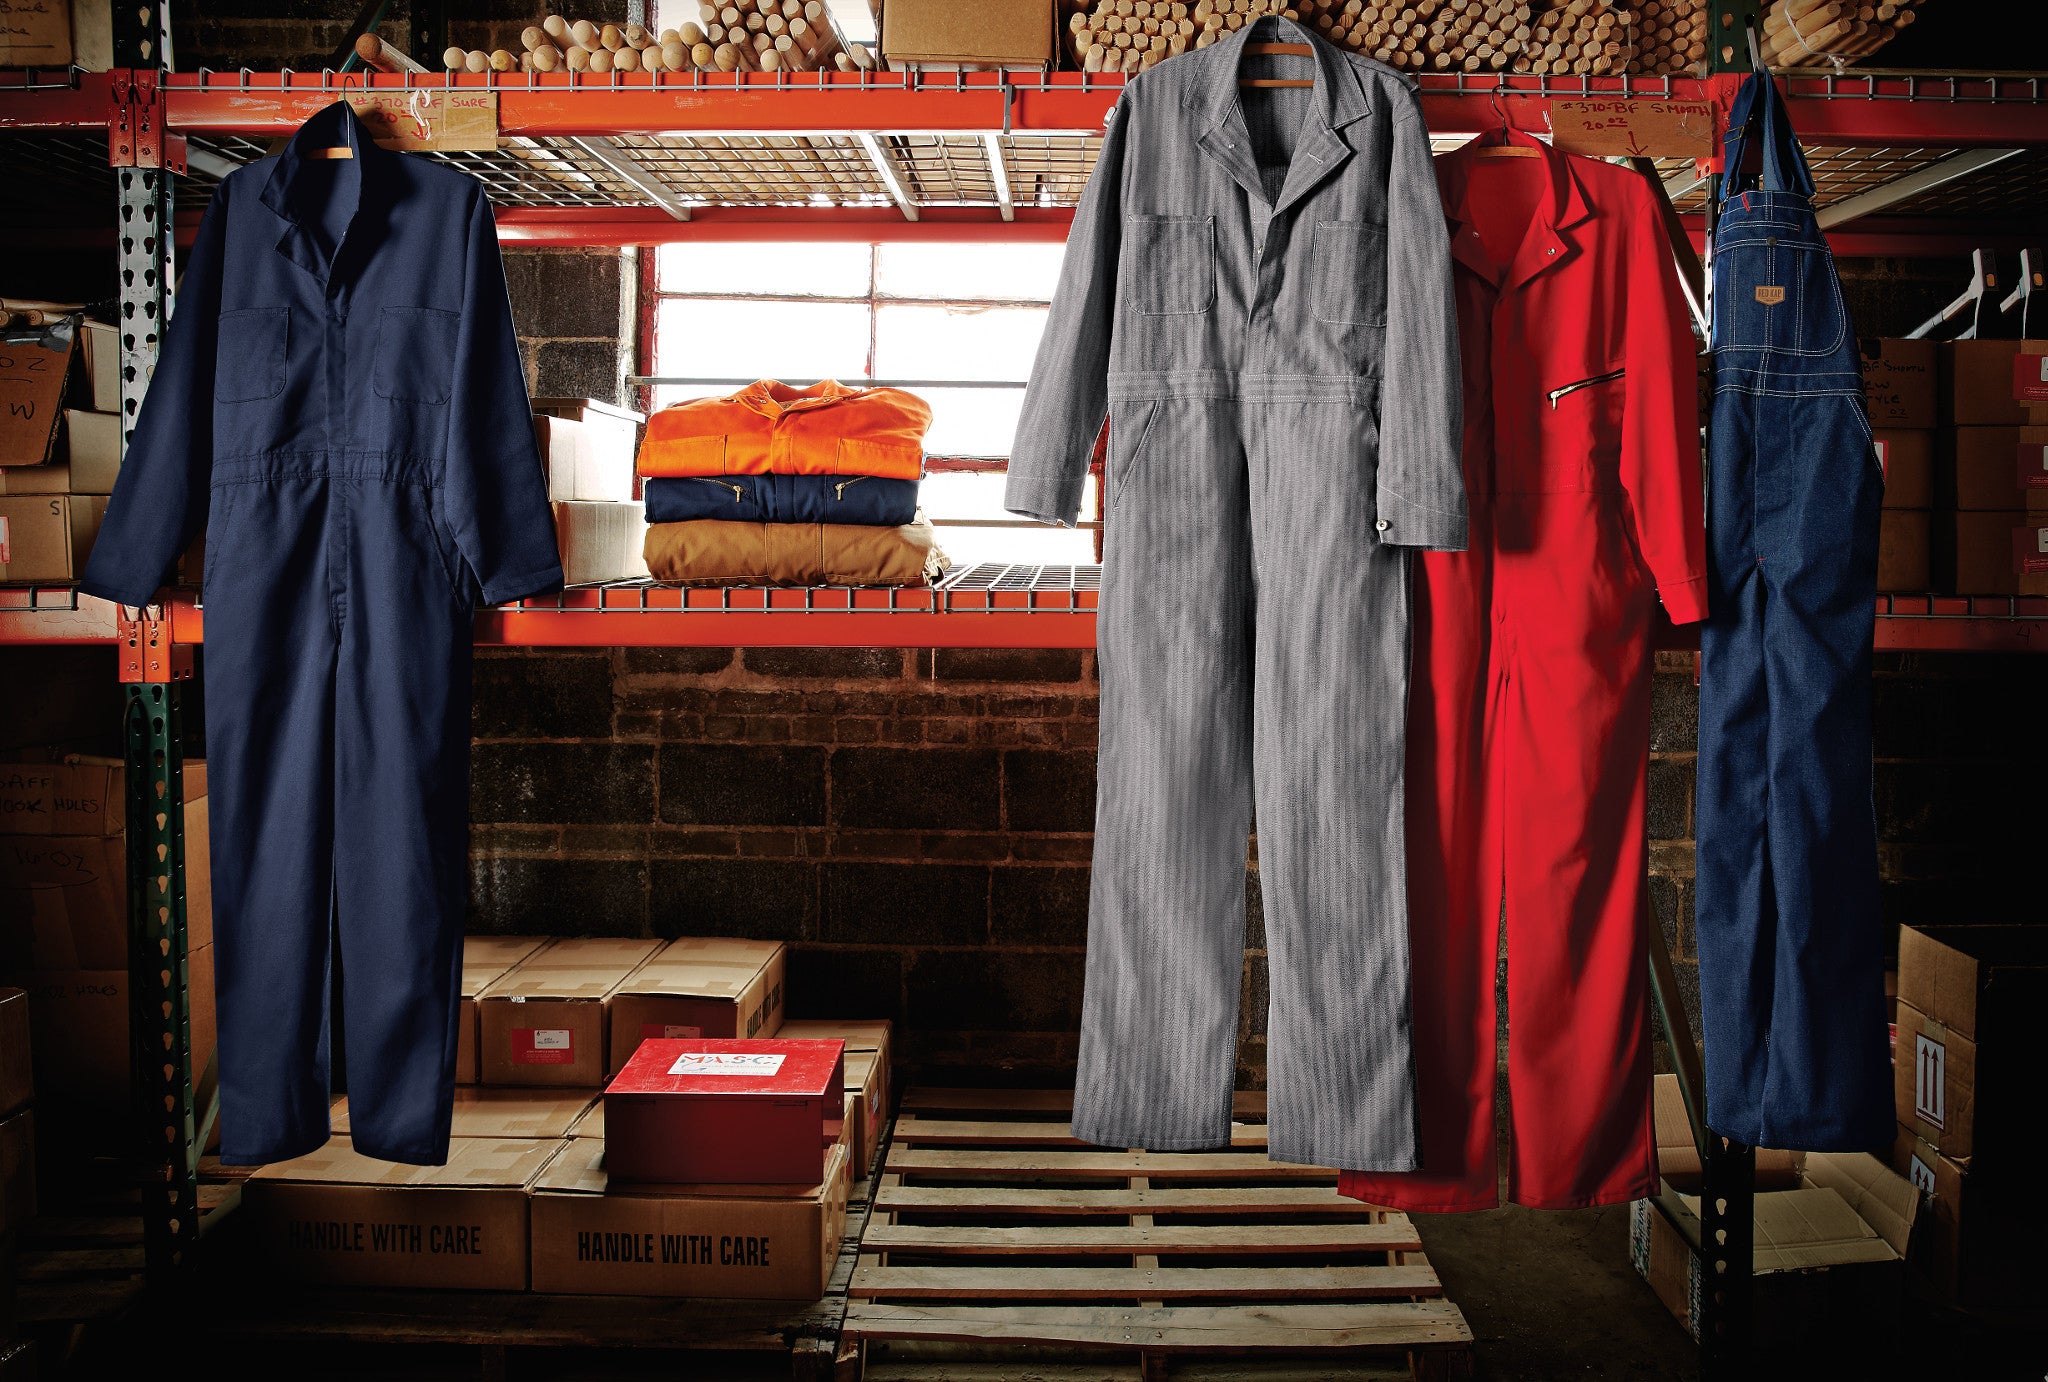 Red Kap 100% Cotton Coverall - Button Front - CC16